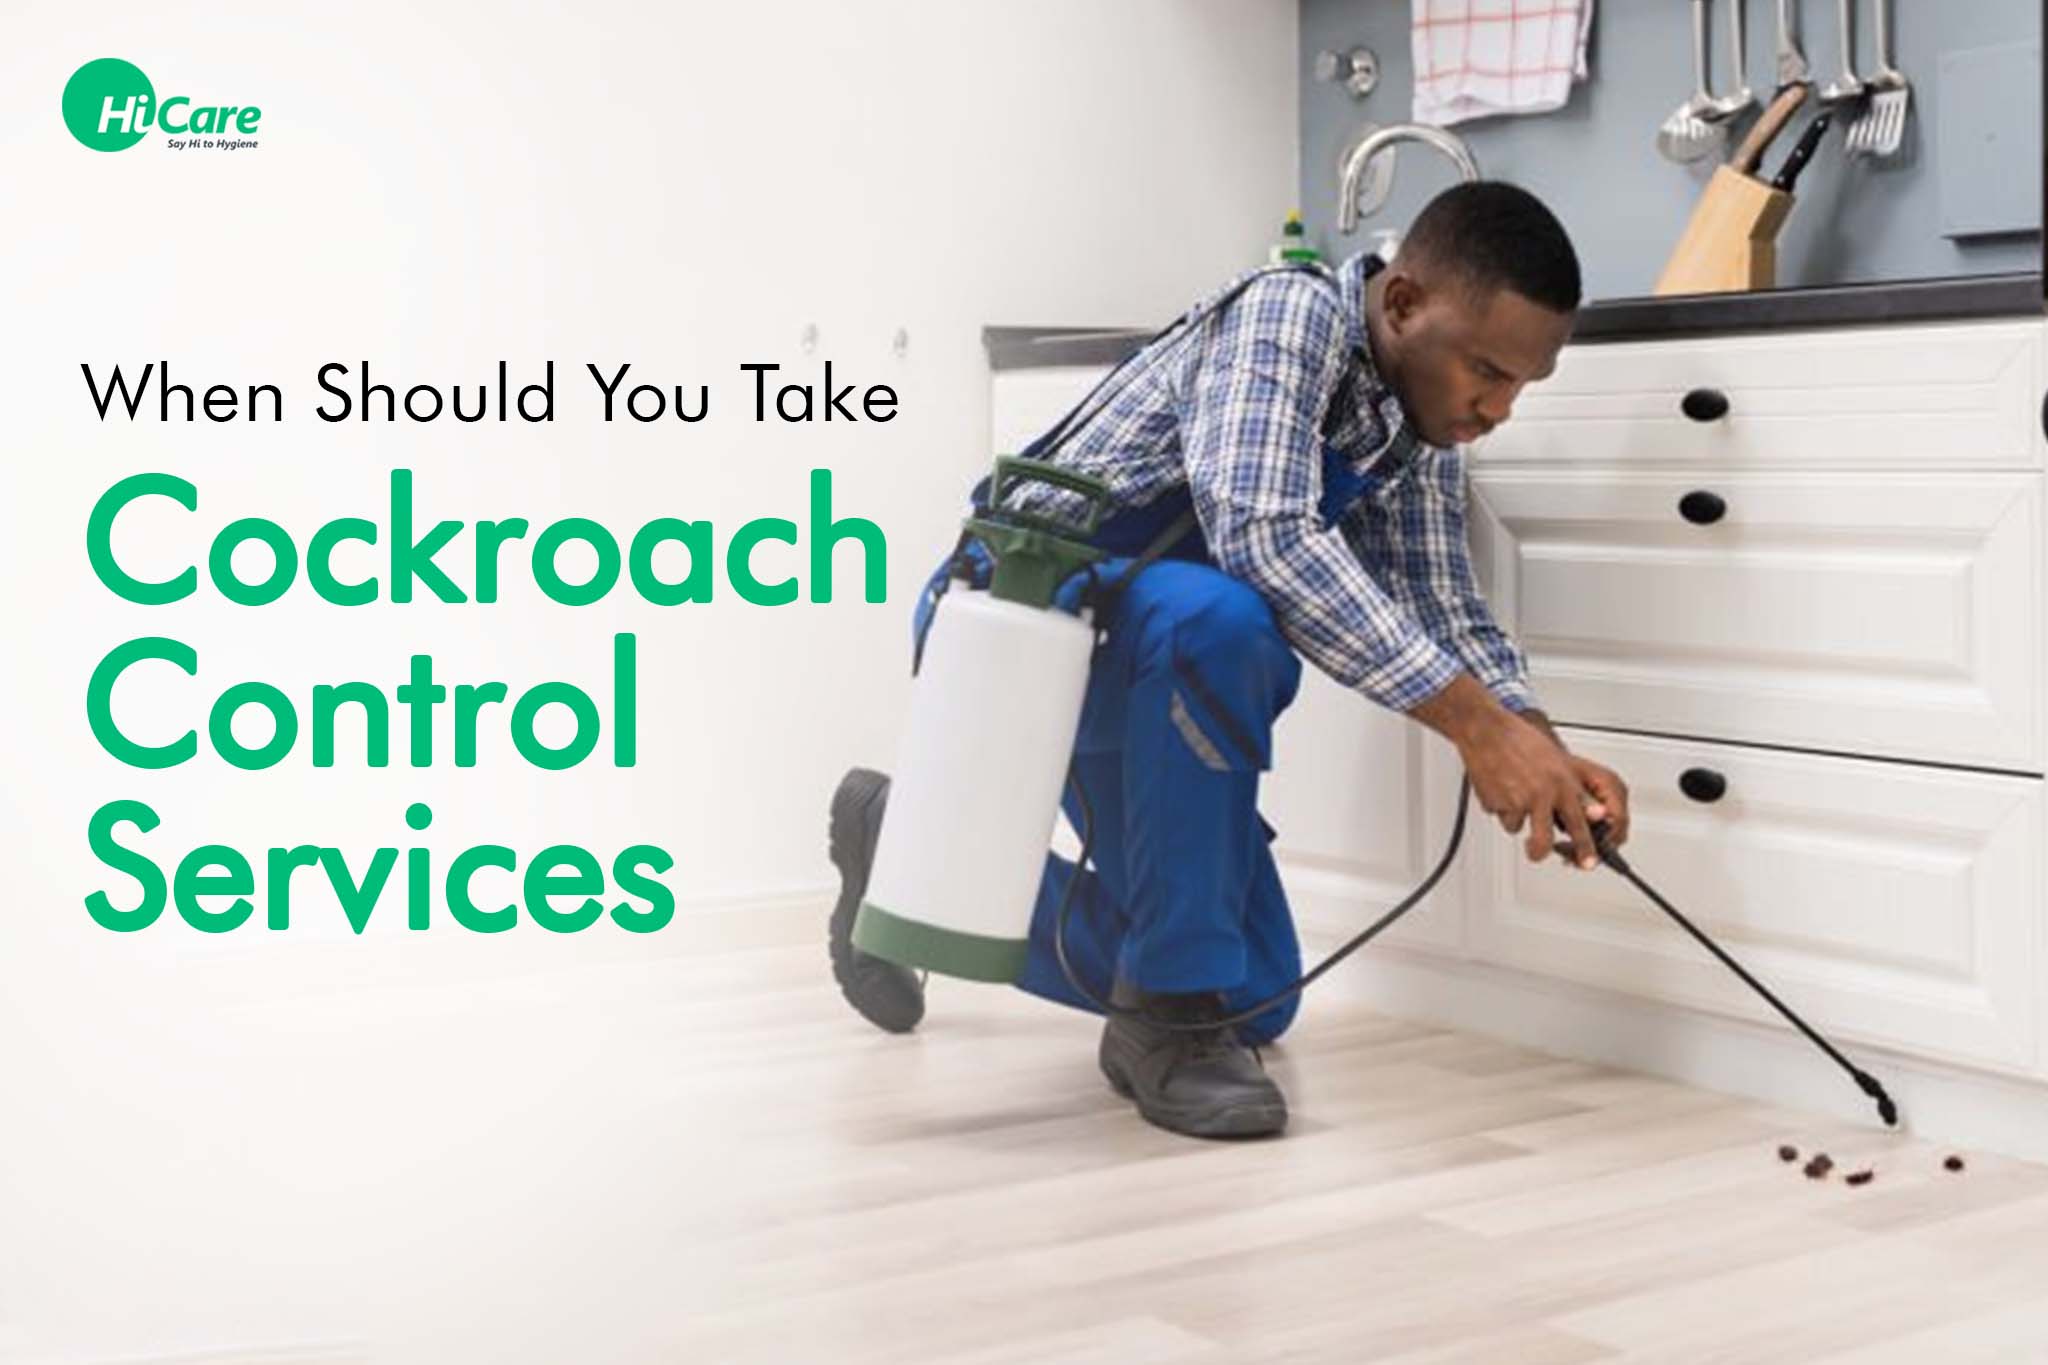 When Should You Take Cockroach Control Services | HiCare